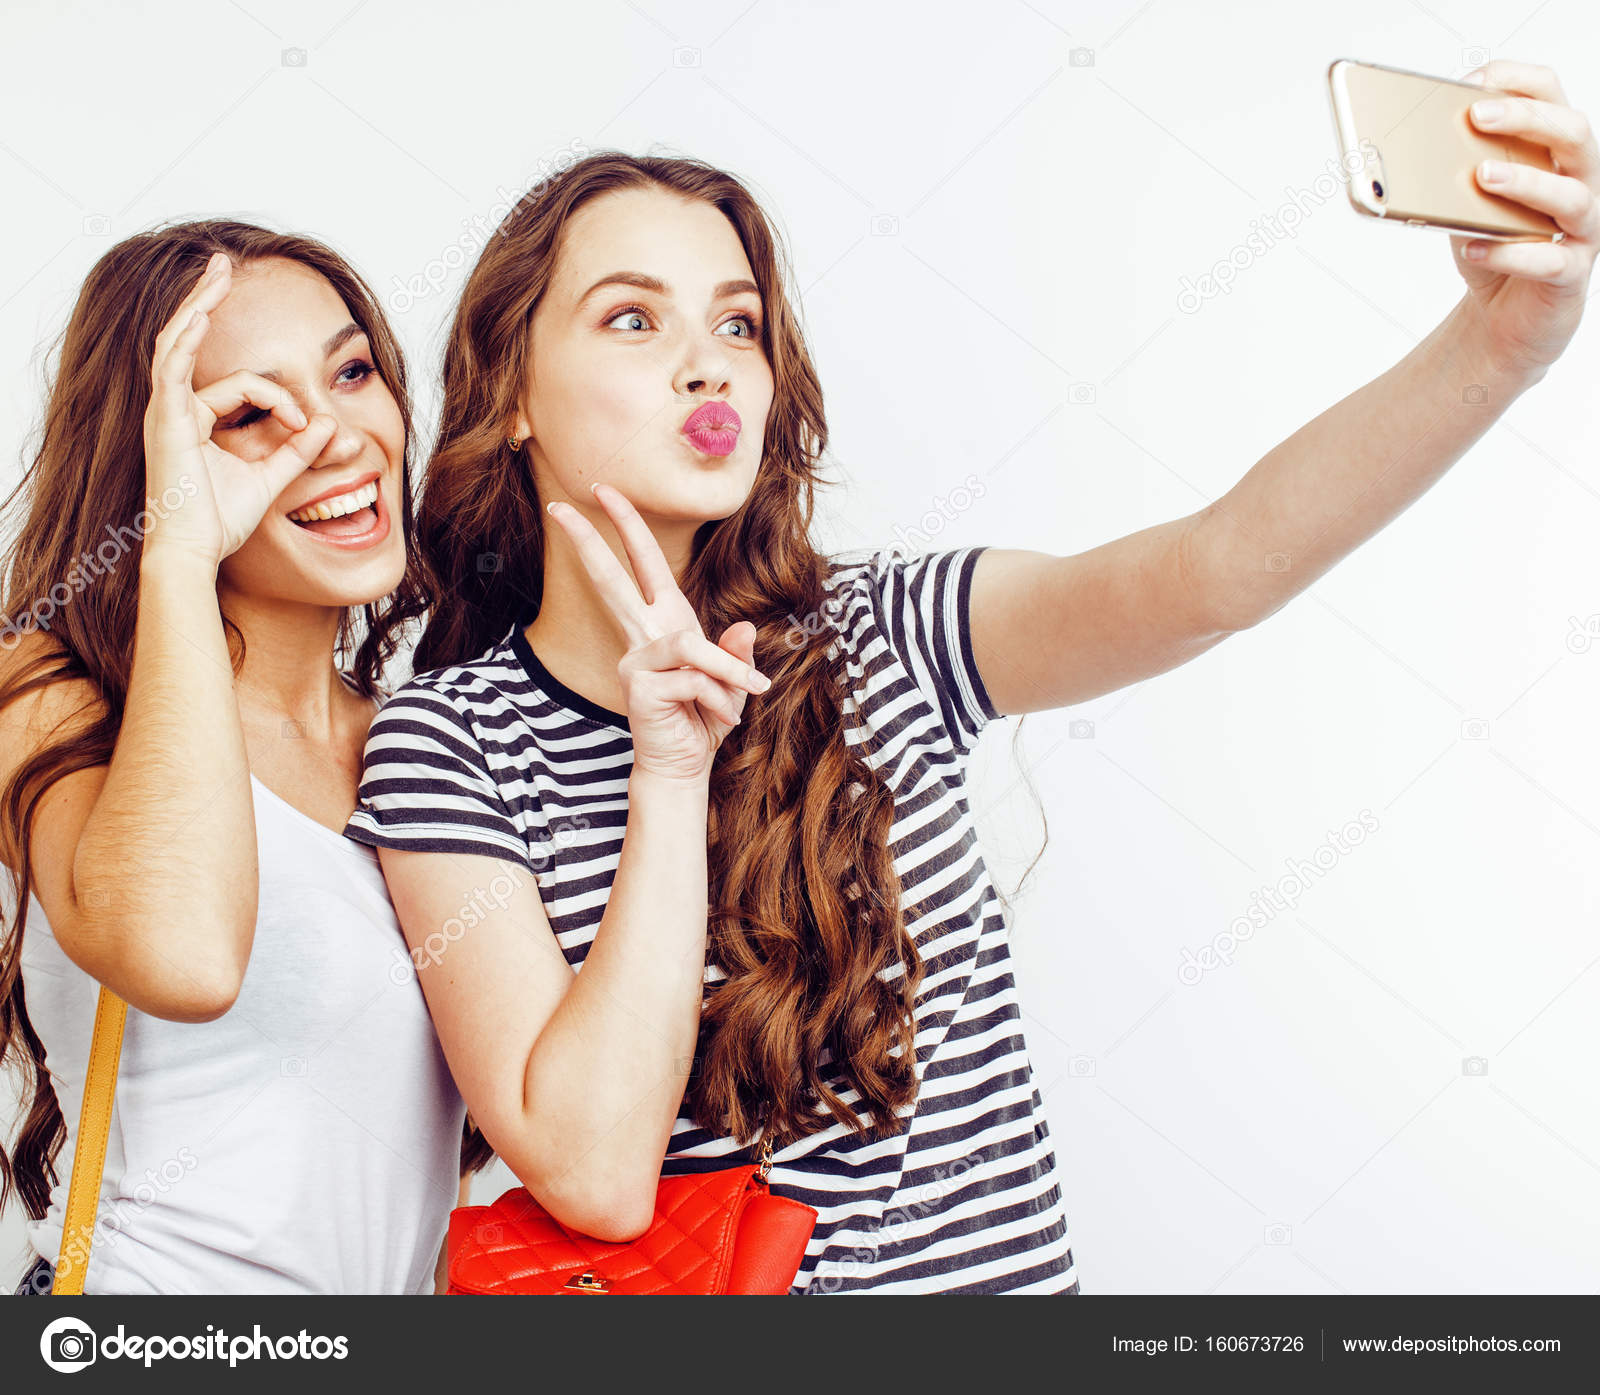 Selfie Poses With Friends And Sisters/ Photo Poses For Friends/ Photography  Ideas With Sisters - YouTube